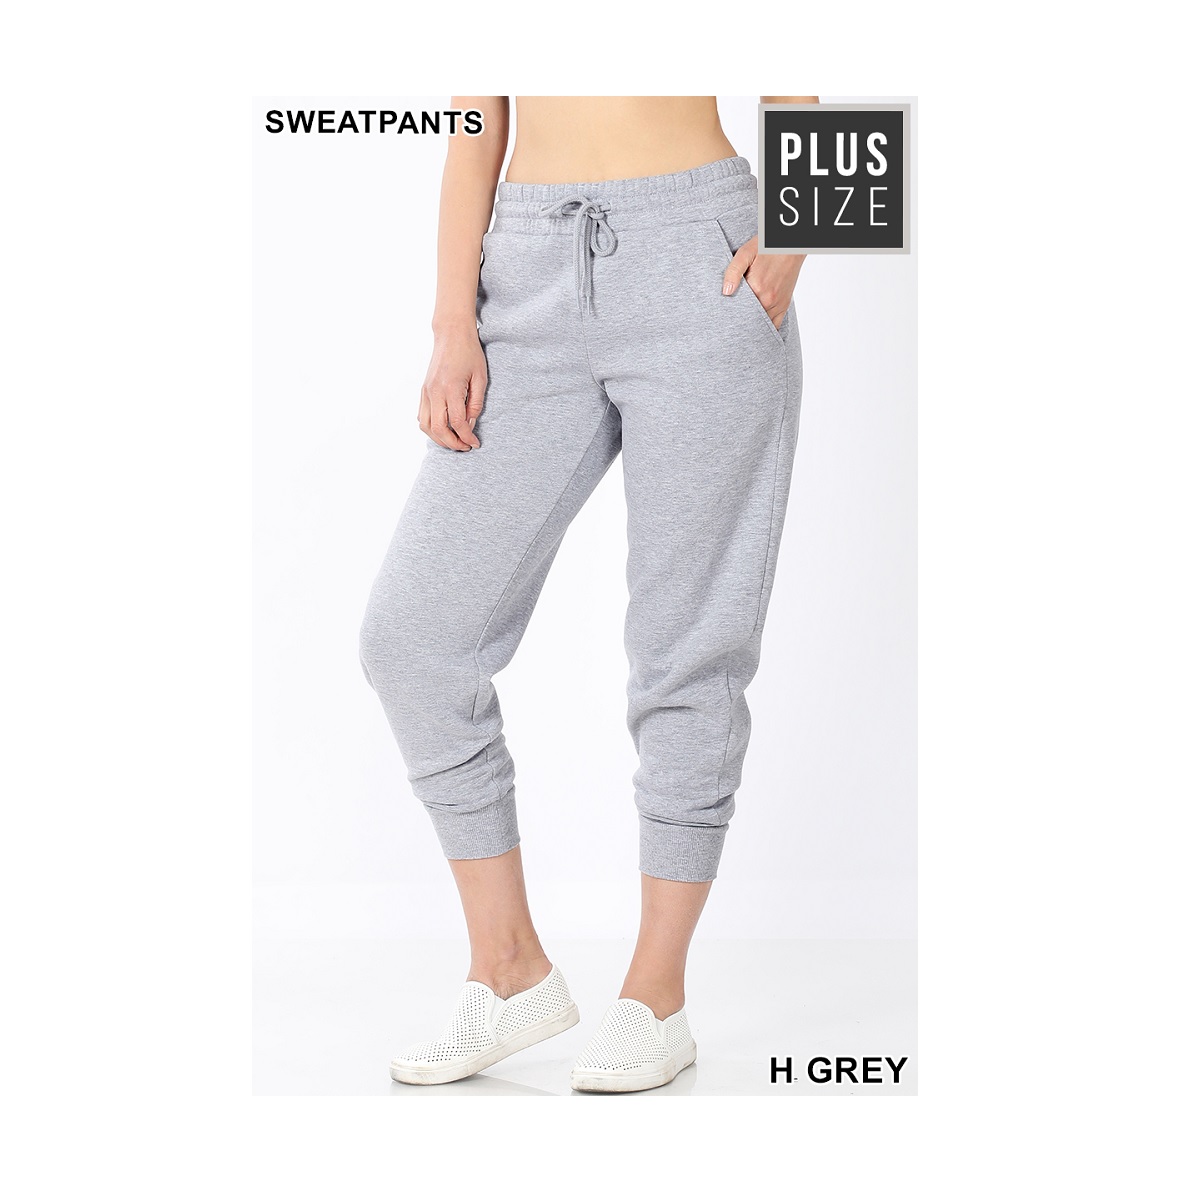 Women's Plus Size Sweatpants with pockets, Fleece.  Elastic Waistband with Draw String,